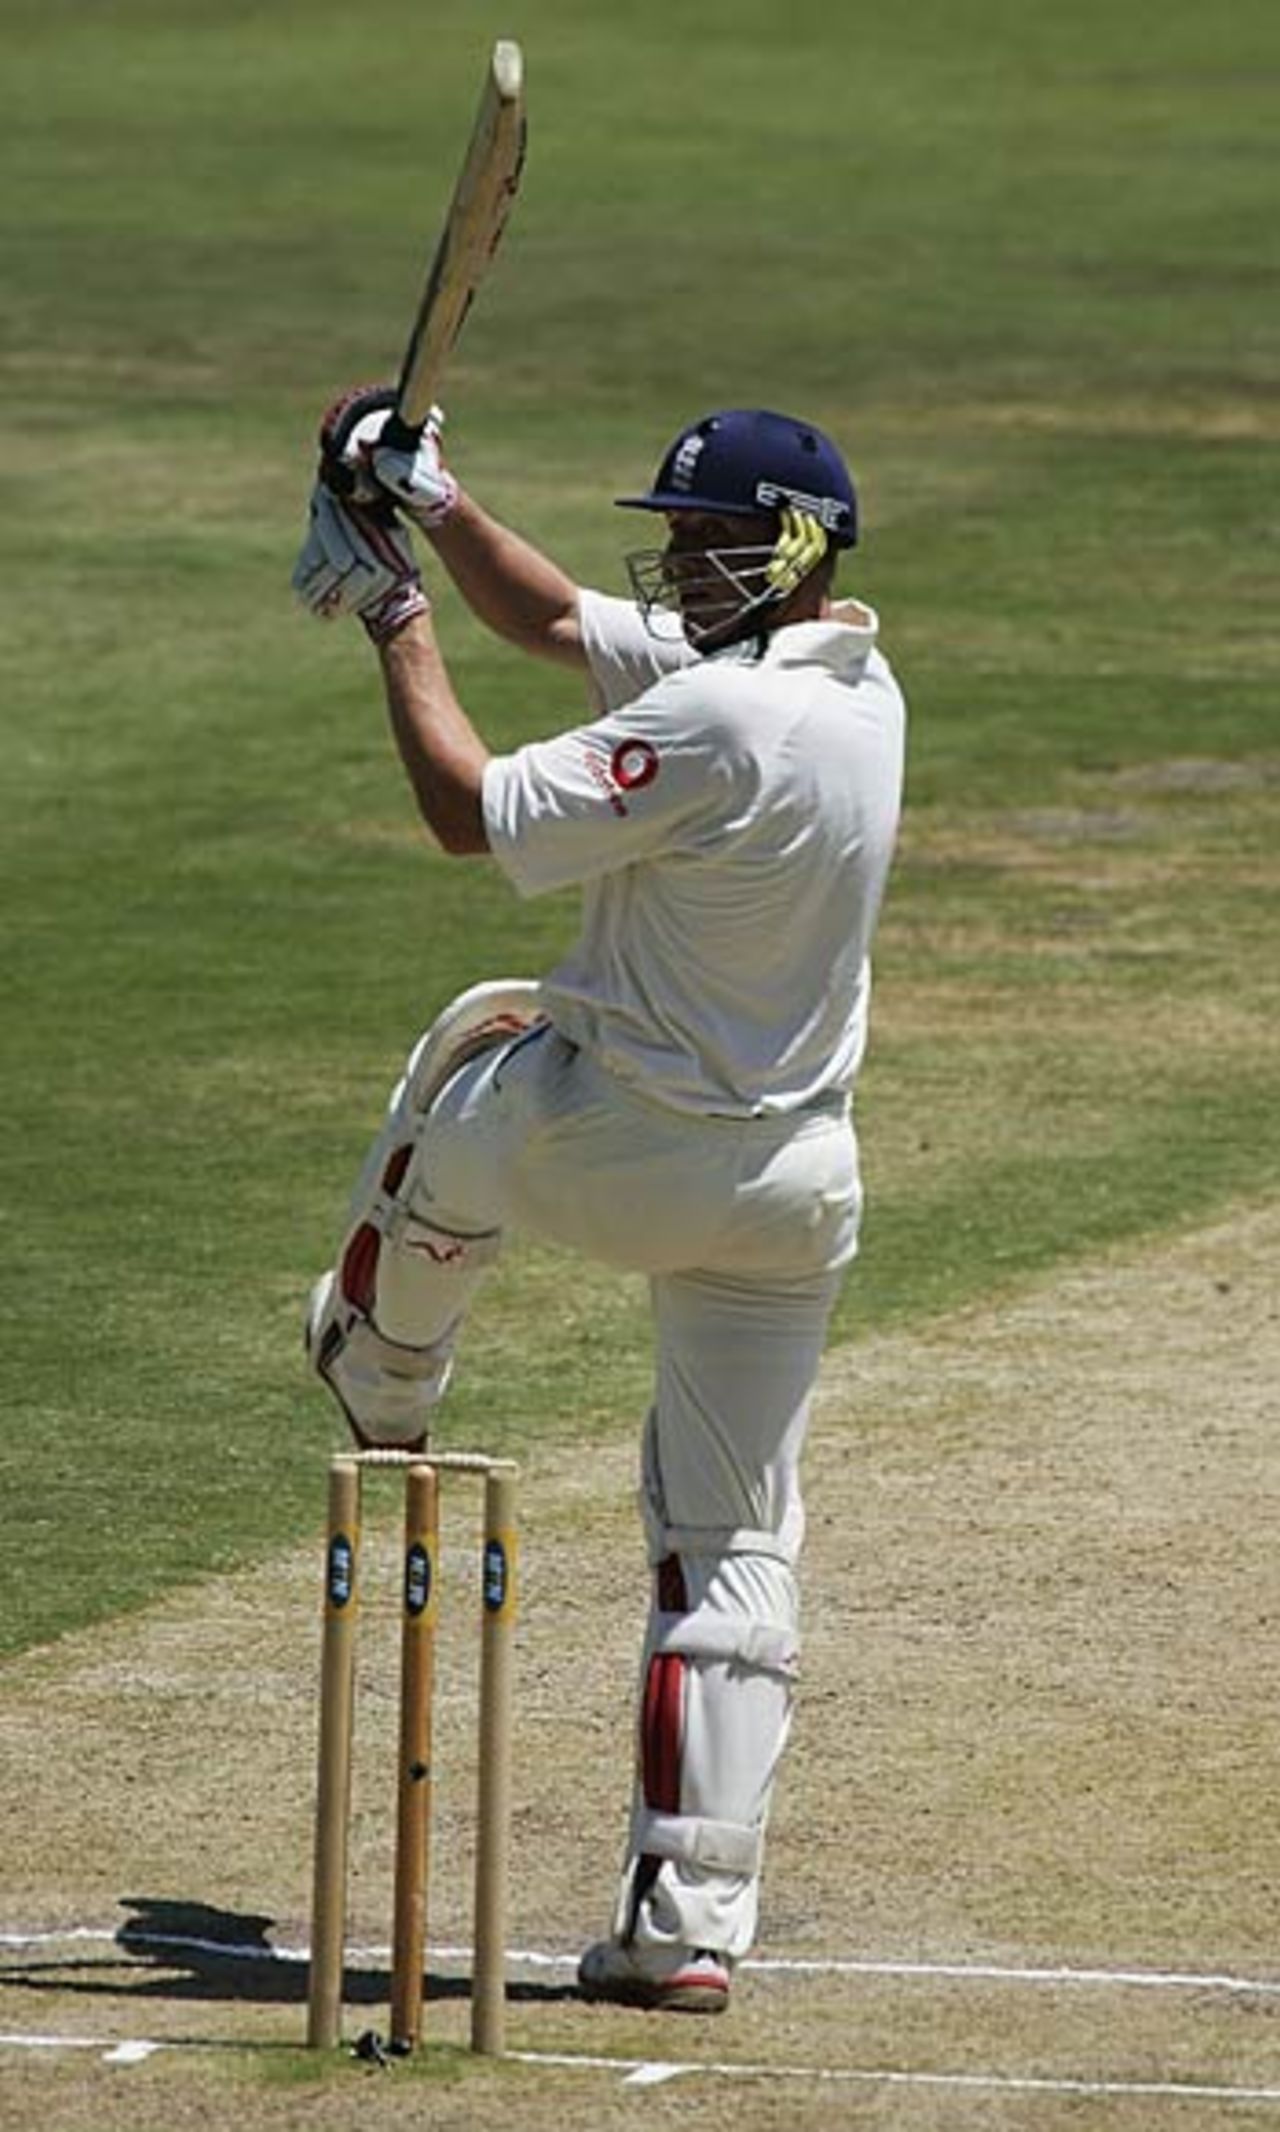 Andrew Flintoff smacks a six, his 50th in Test cricket, South Africa v England, 5th Test, Centurion, January 24, 2005